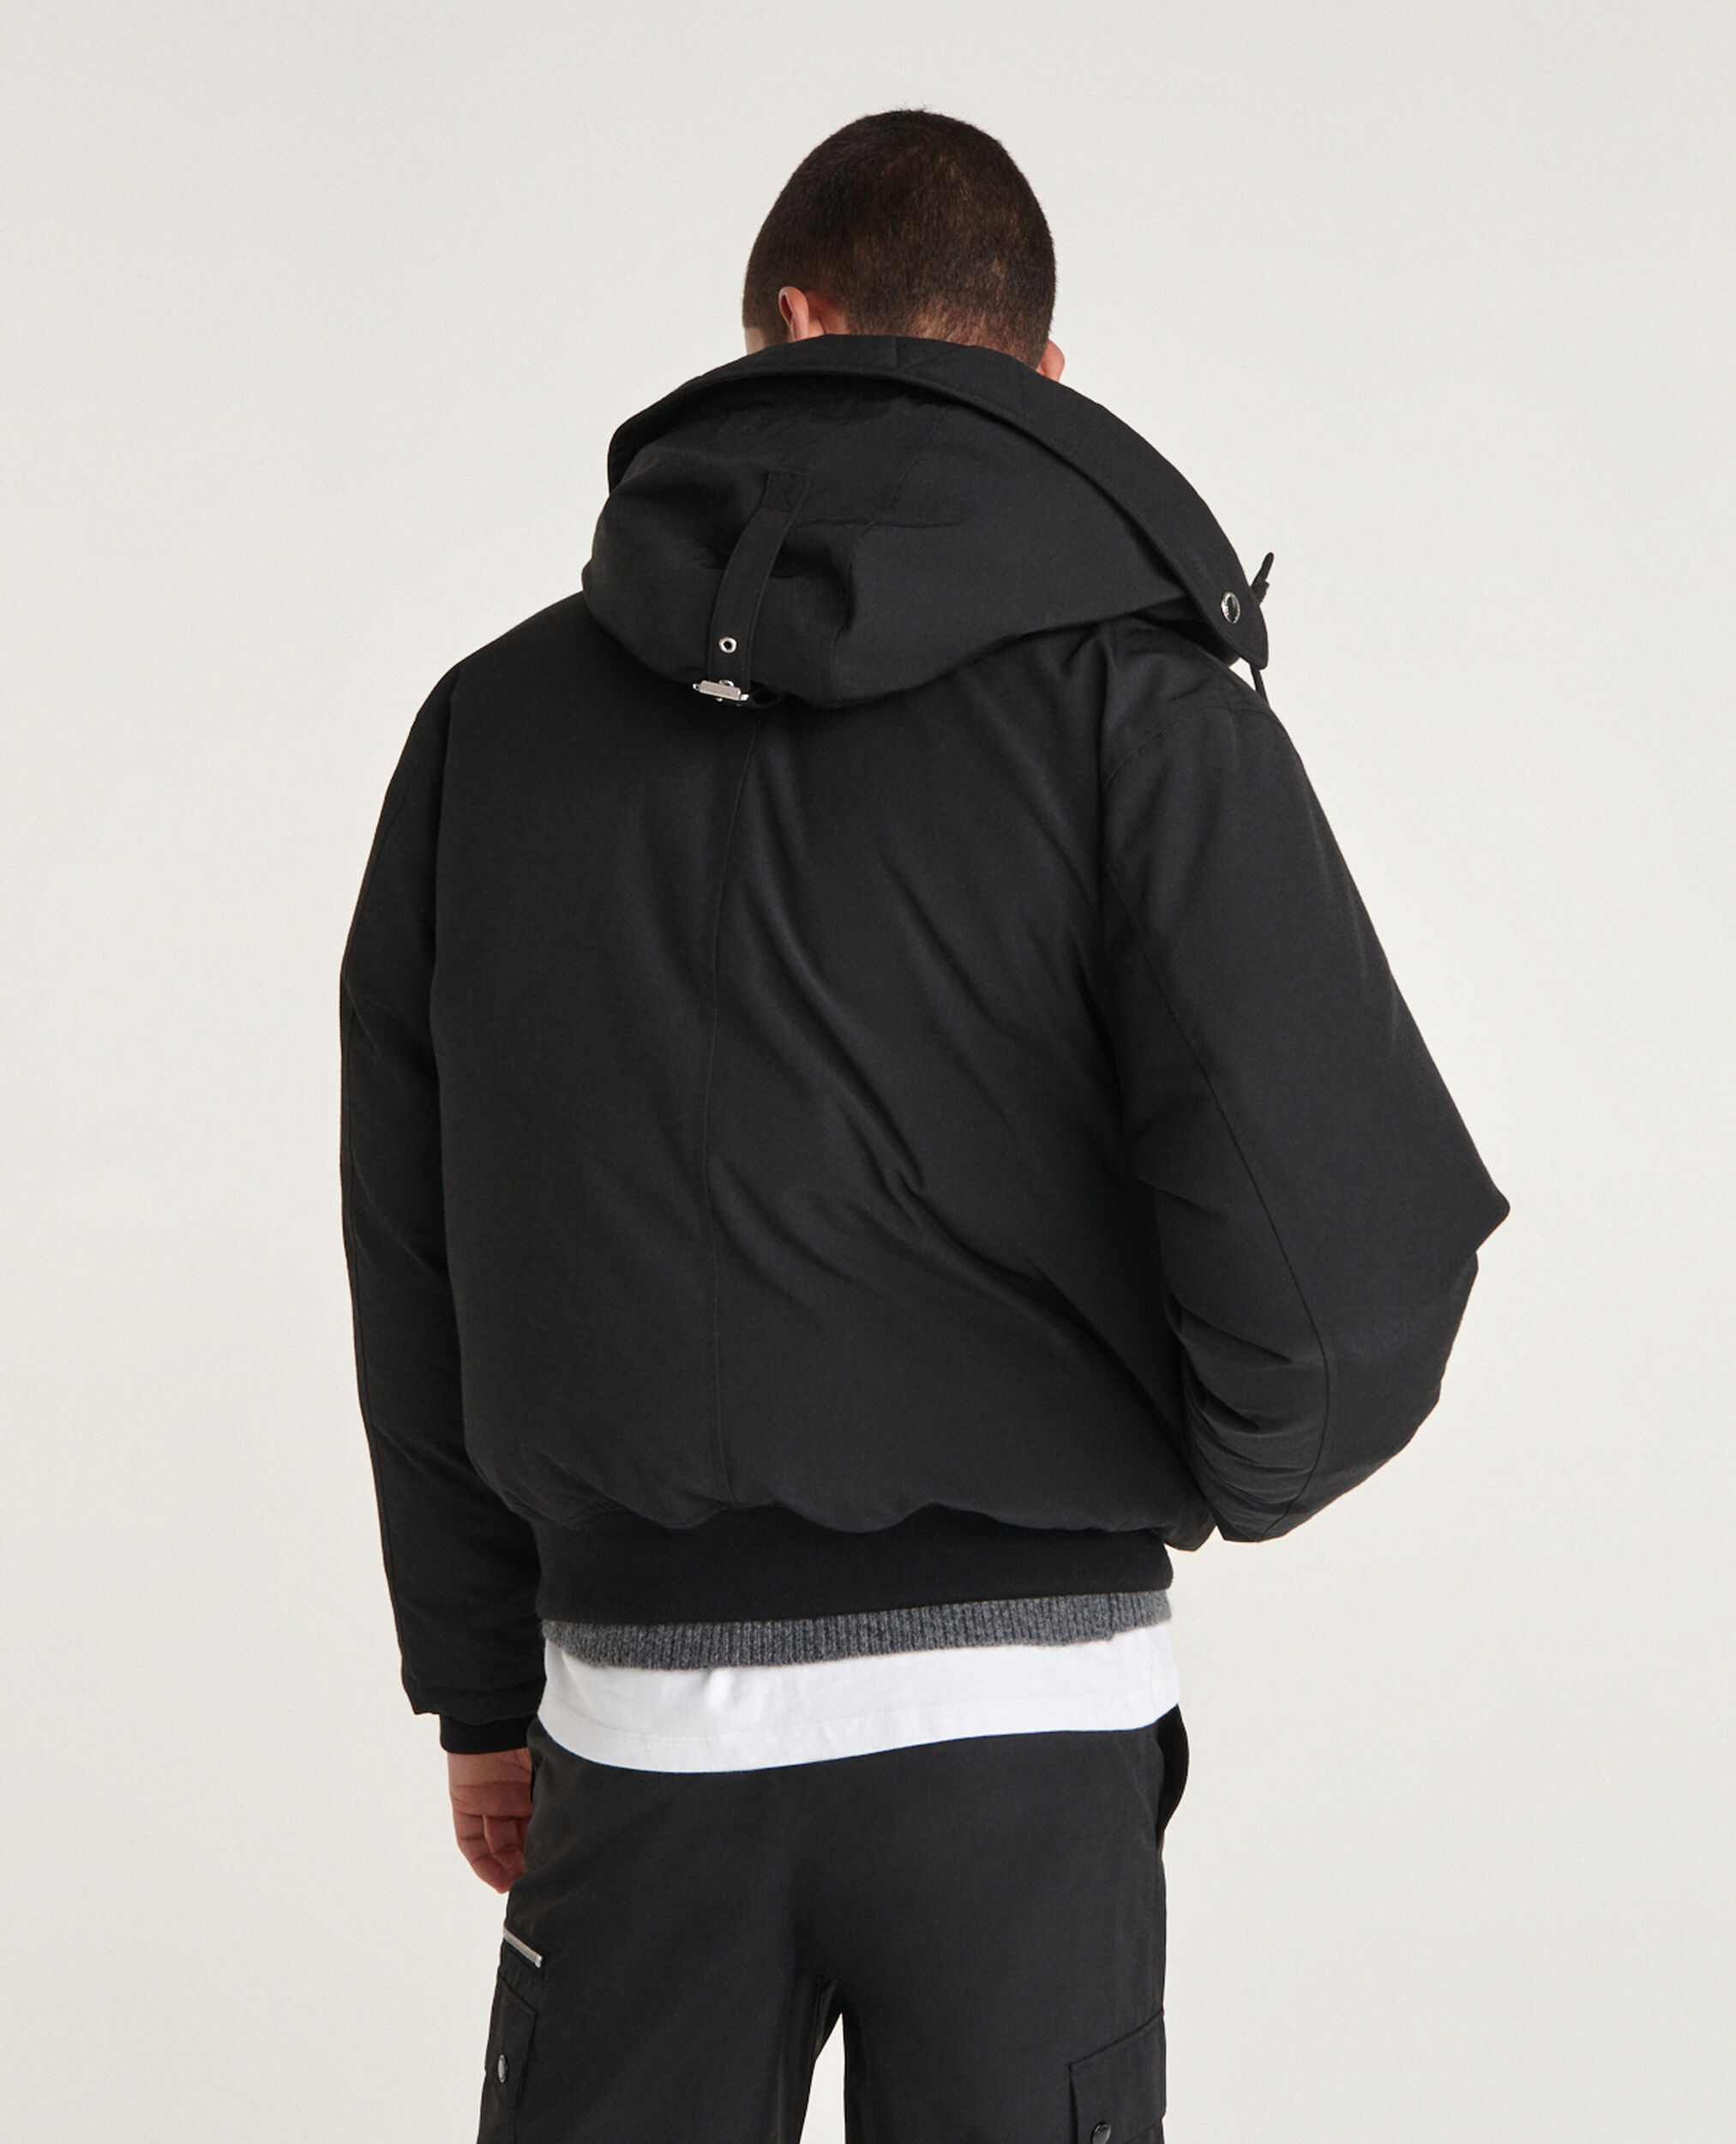 Black down jacket with rubber K logo | The Kooples - US